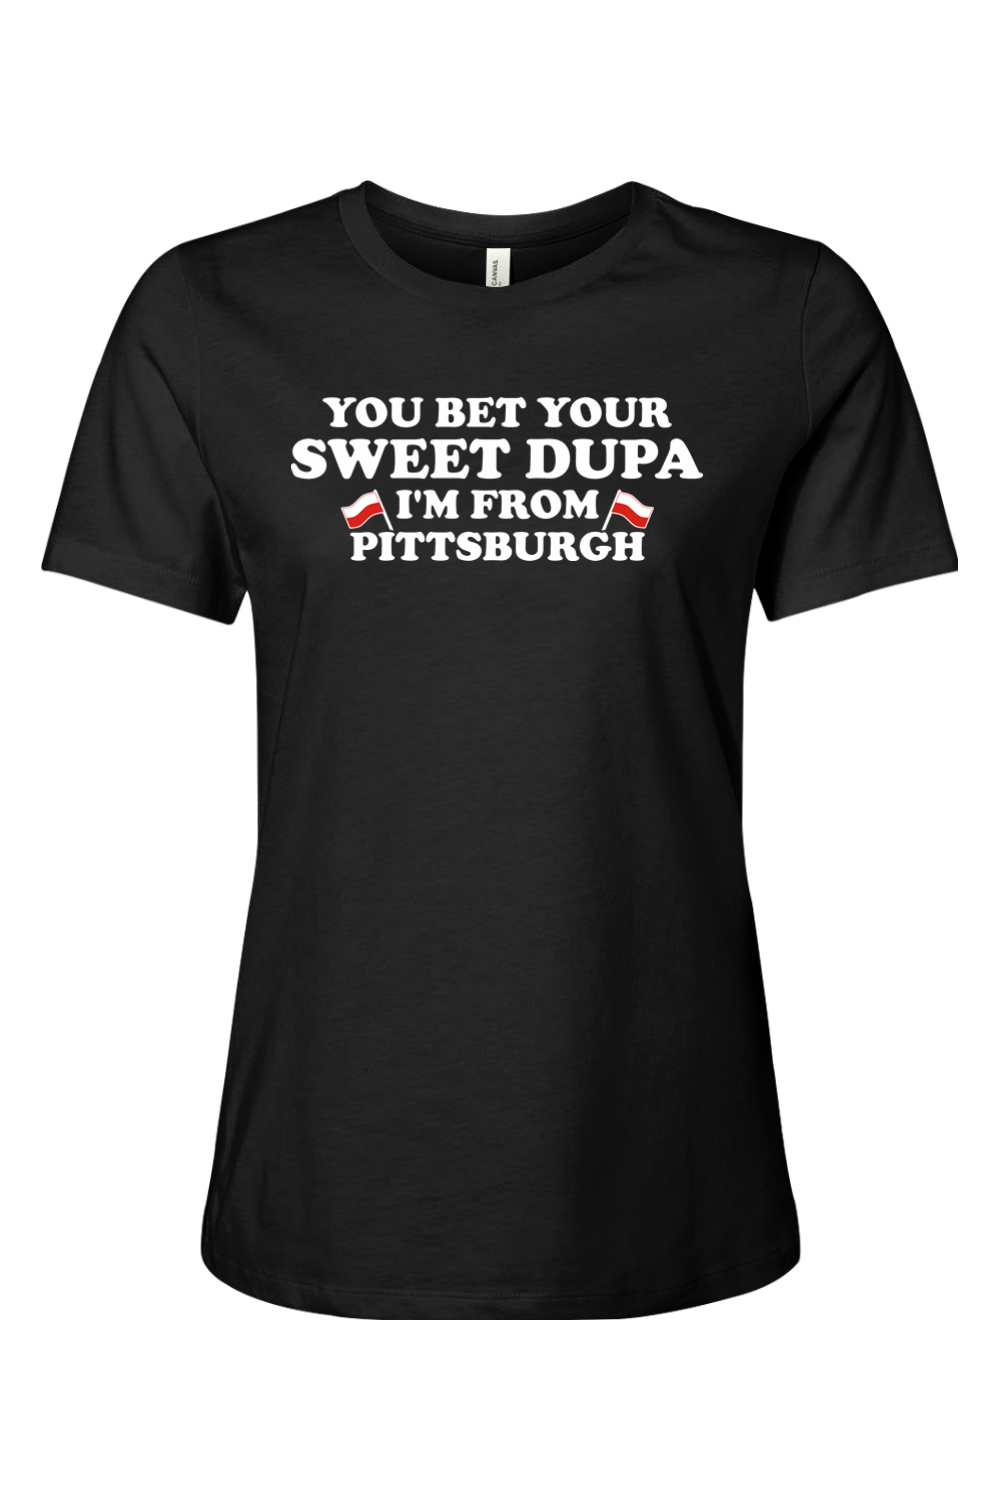 You Bet Your Sweet Dupa I'm From Pittsburgh - Ladies Tee - Yinzylvania